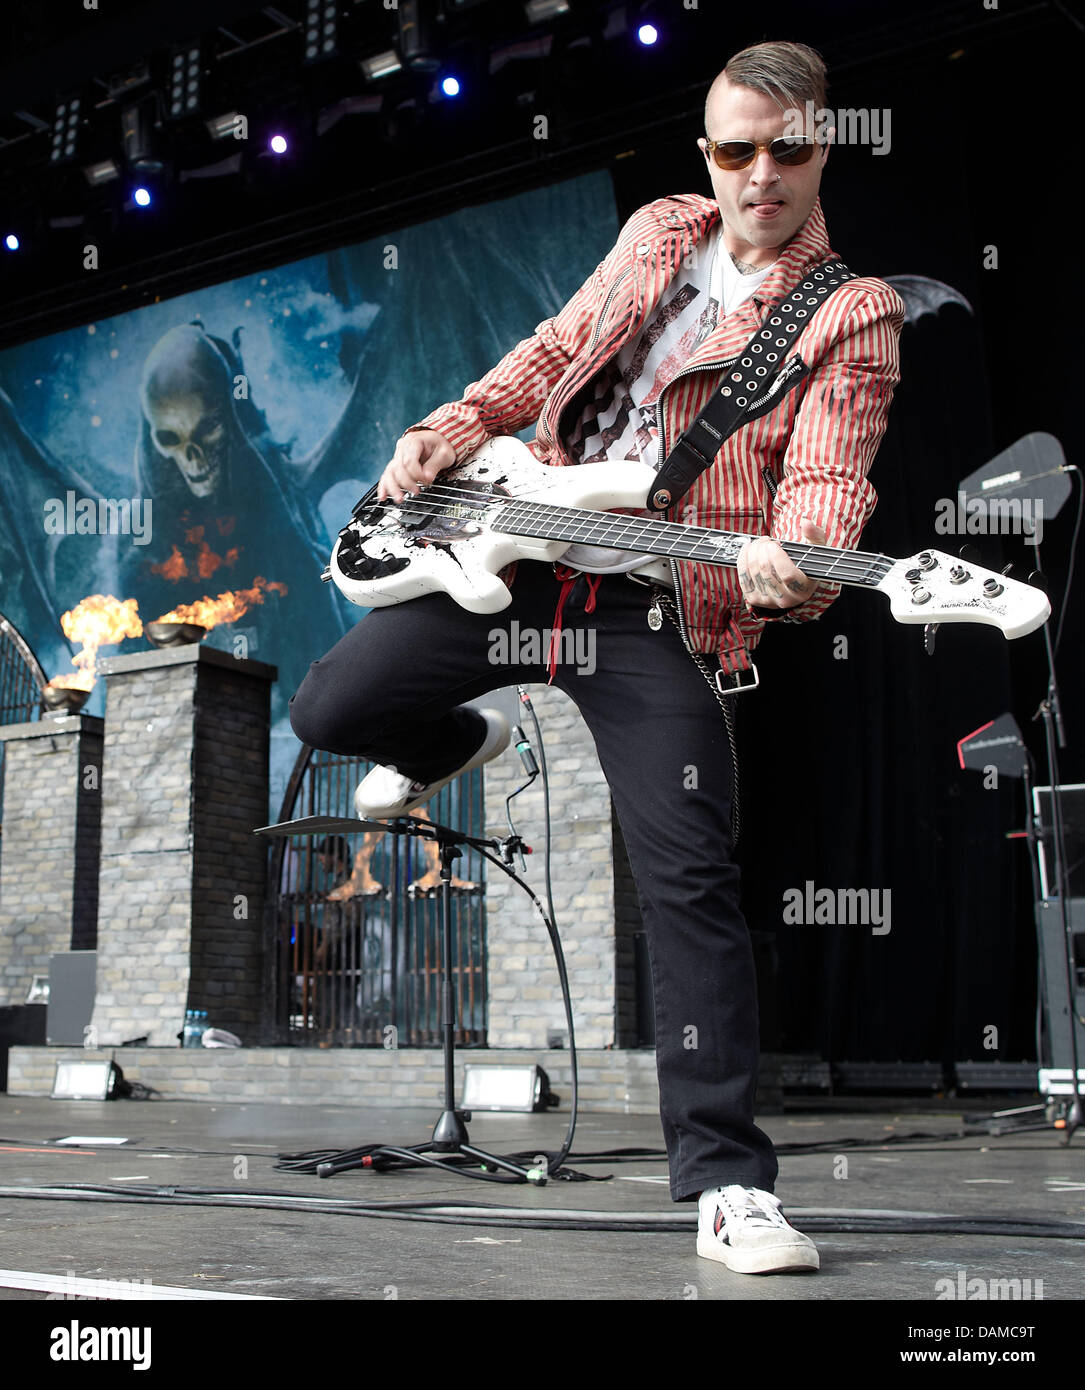 Johnny Christ, bassist of the US metal band Avenged Sevenfold performs at  the festival Rock am Ring (Rock at the Ring) at the Nuerburgring, Germany,  05 June 2011. Organisers expect around 85,000